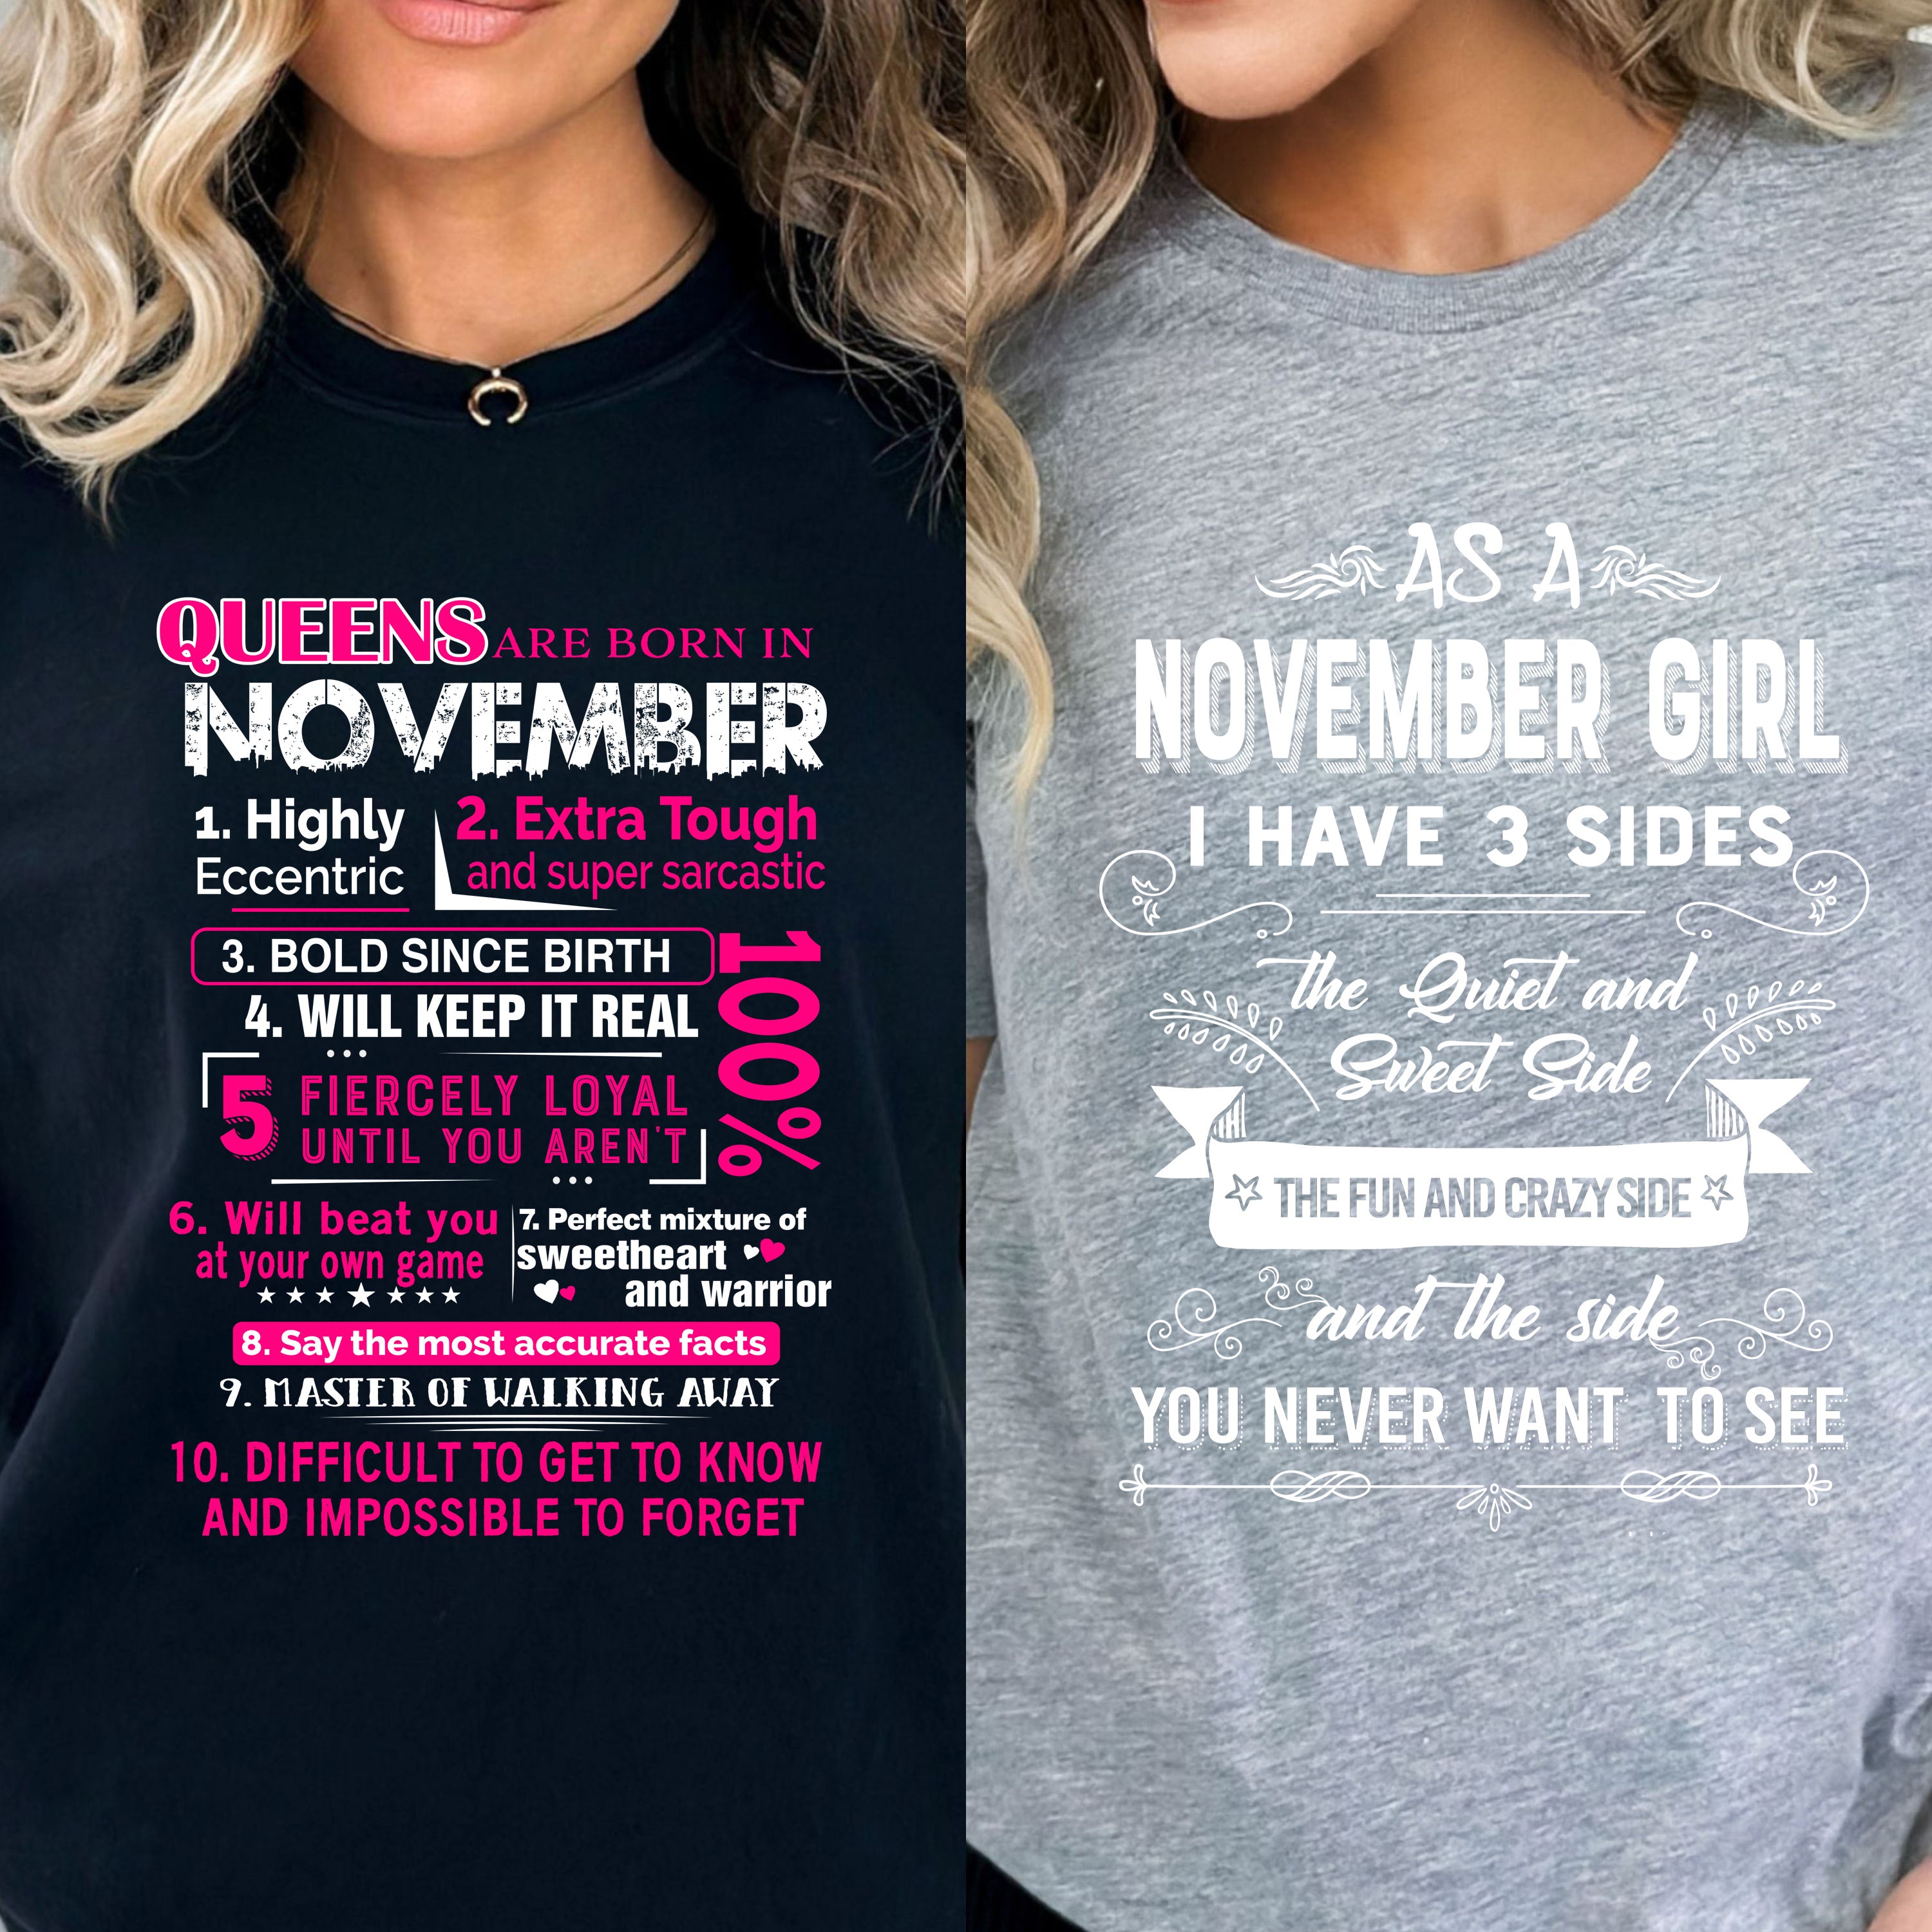 "November Queens + 3 Sides-Pack of 2",T-Shirt.